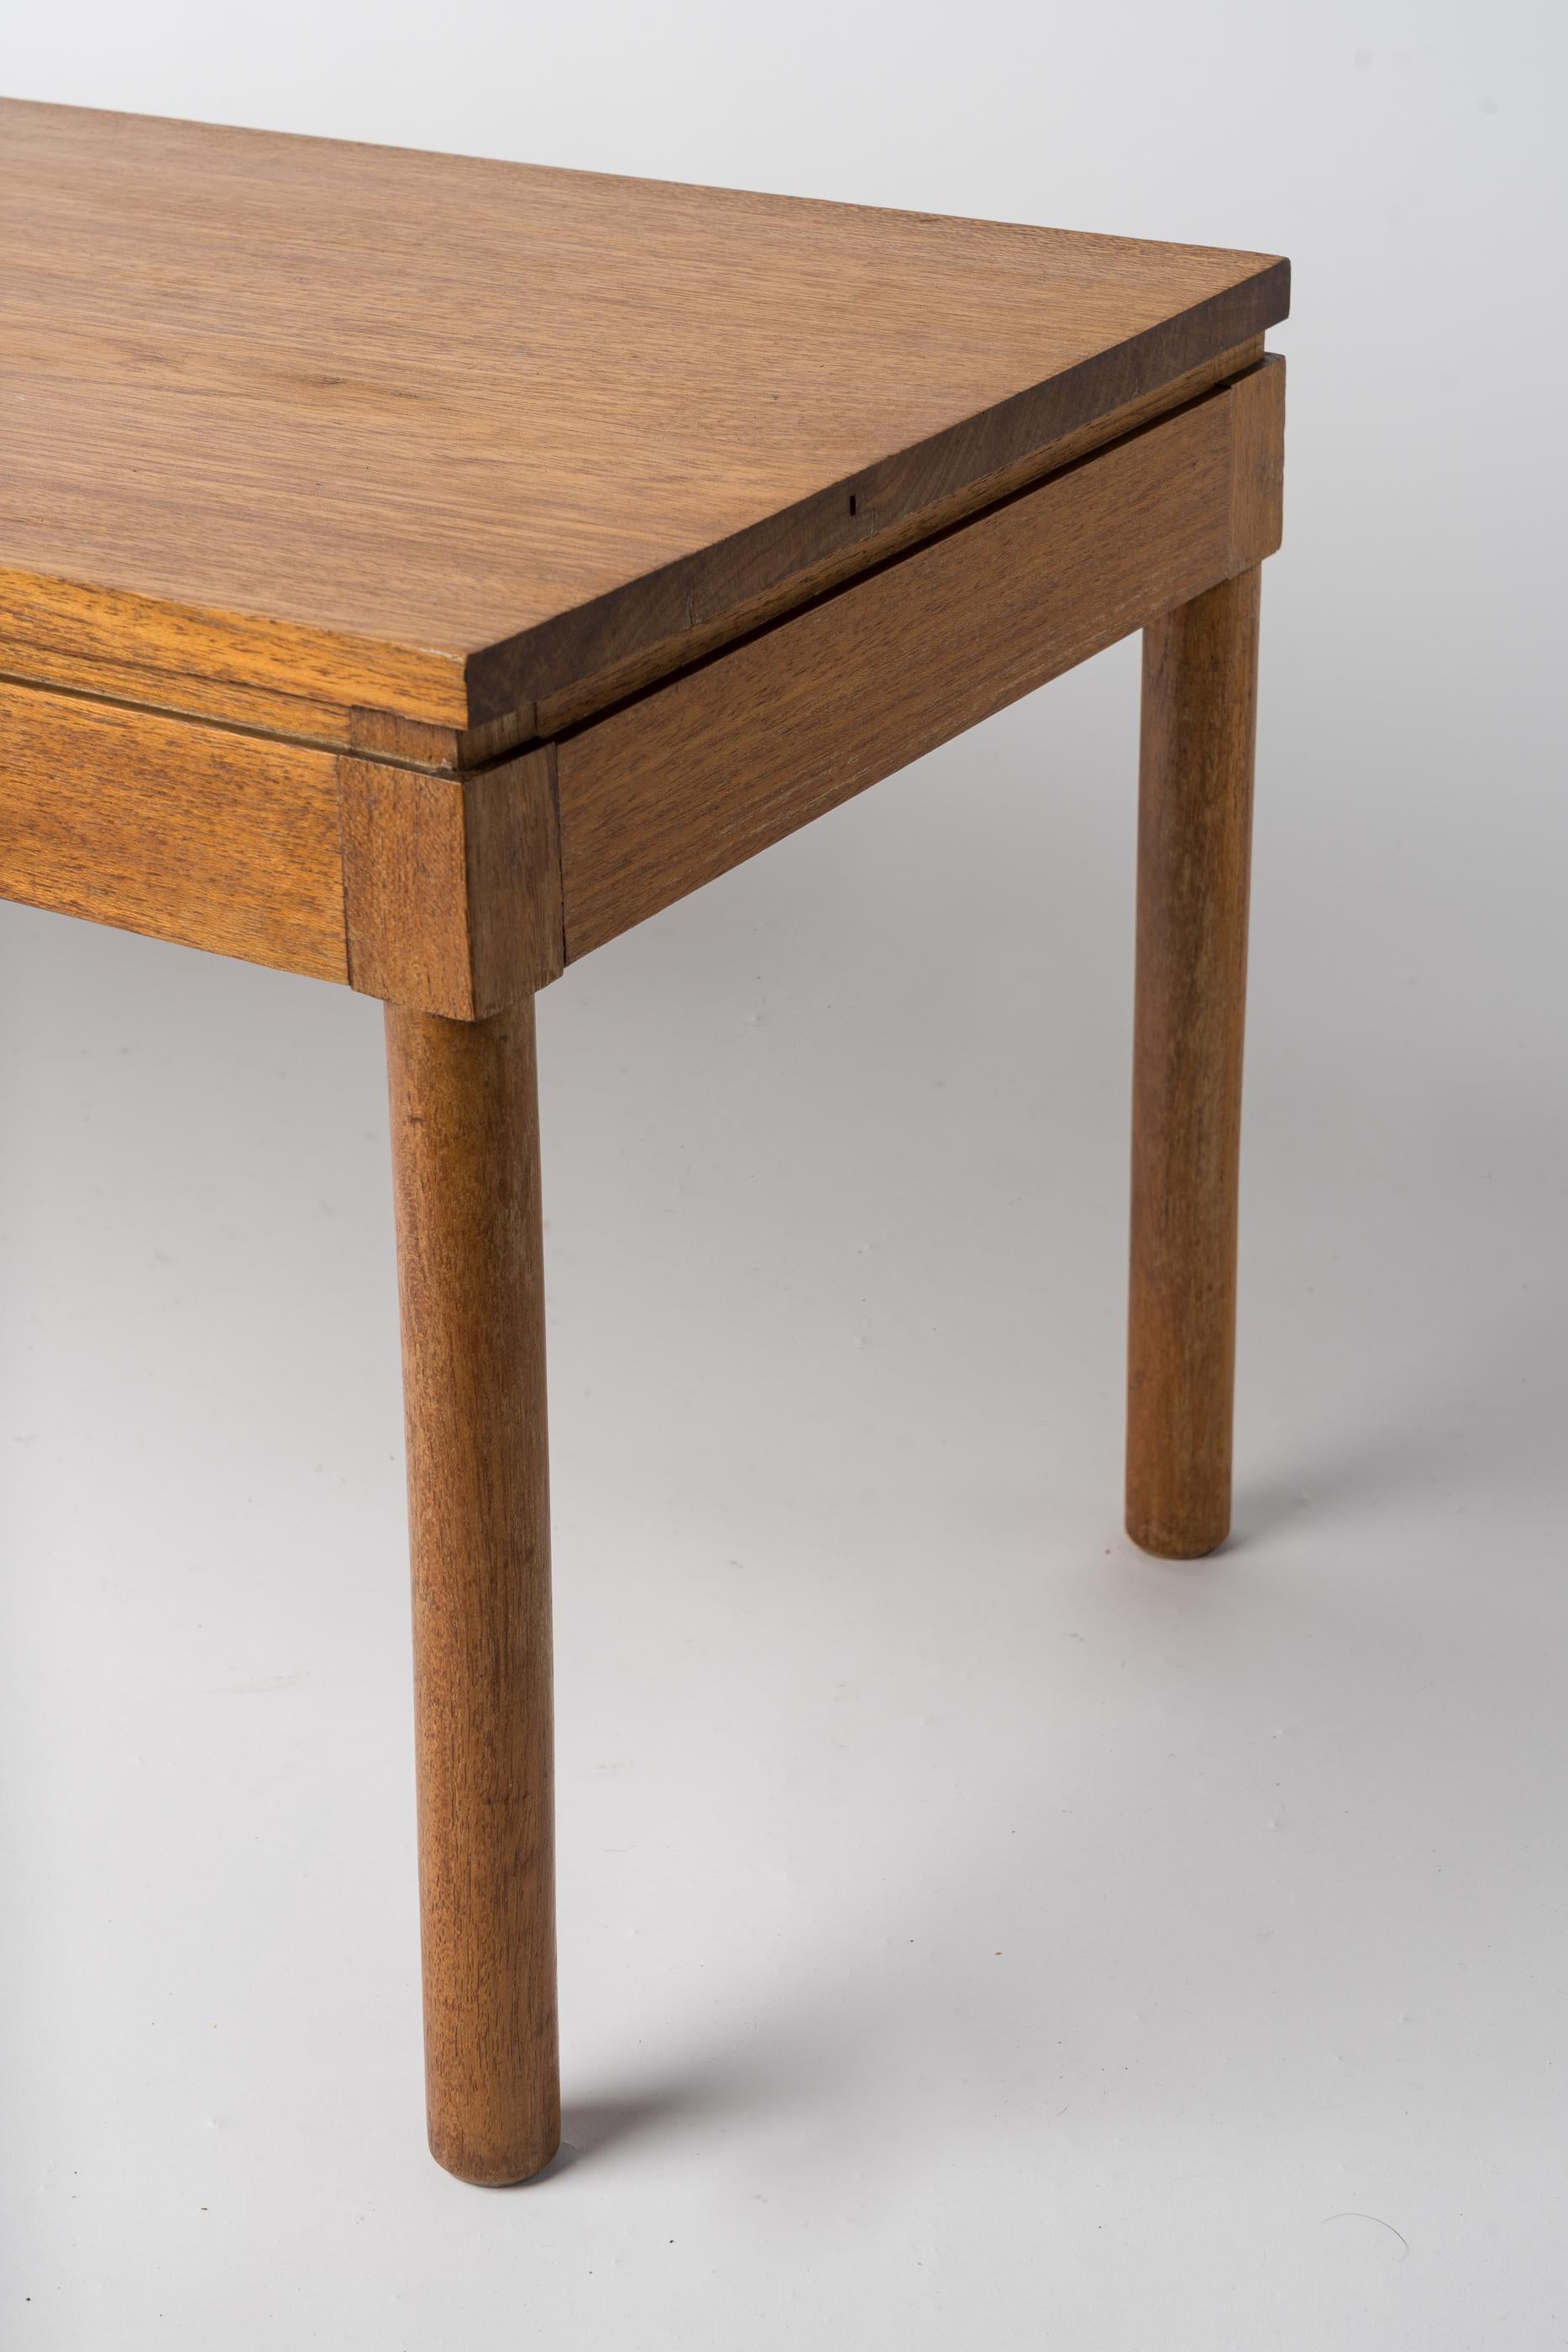 Mid-20th Century Elm Minimalist Coffee Table by Pierre Gautier Delaye - France 1960's For Sale